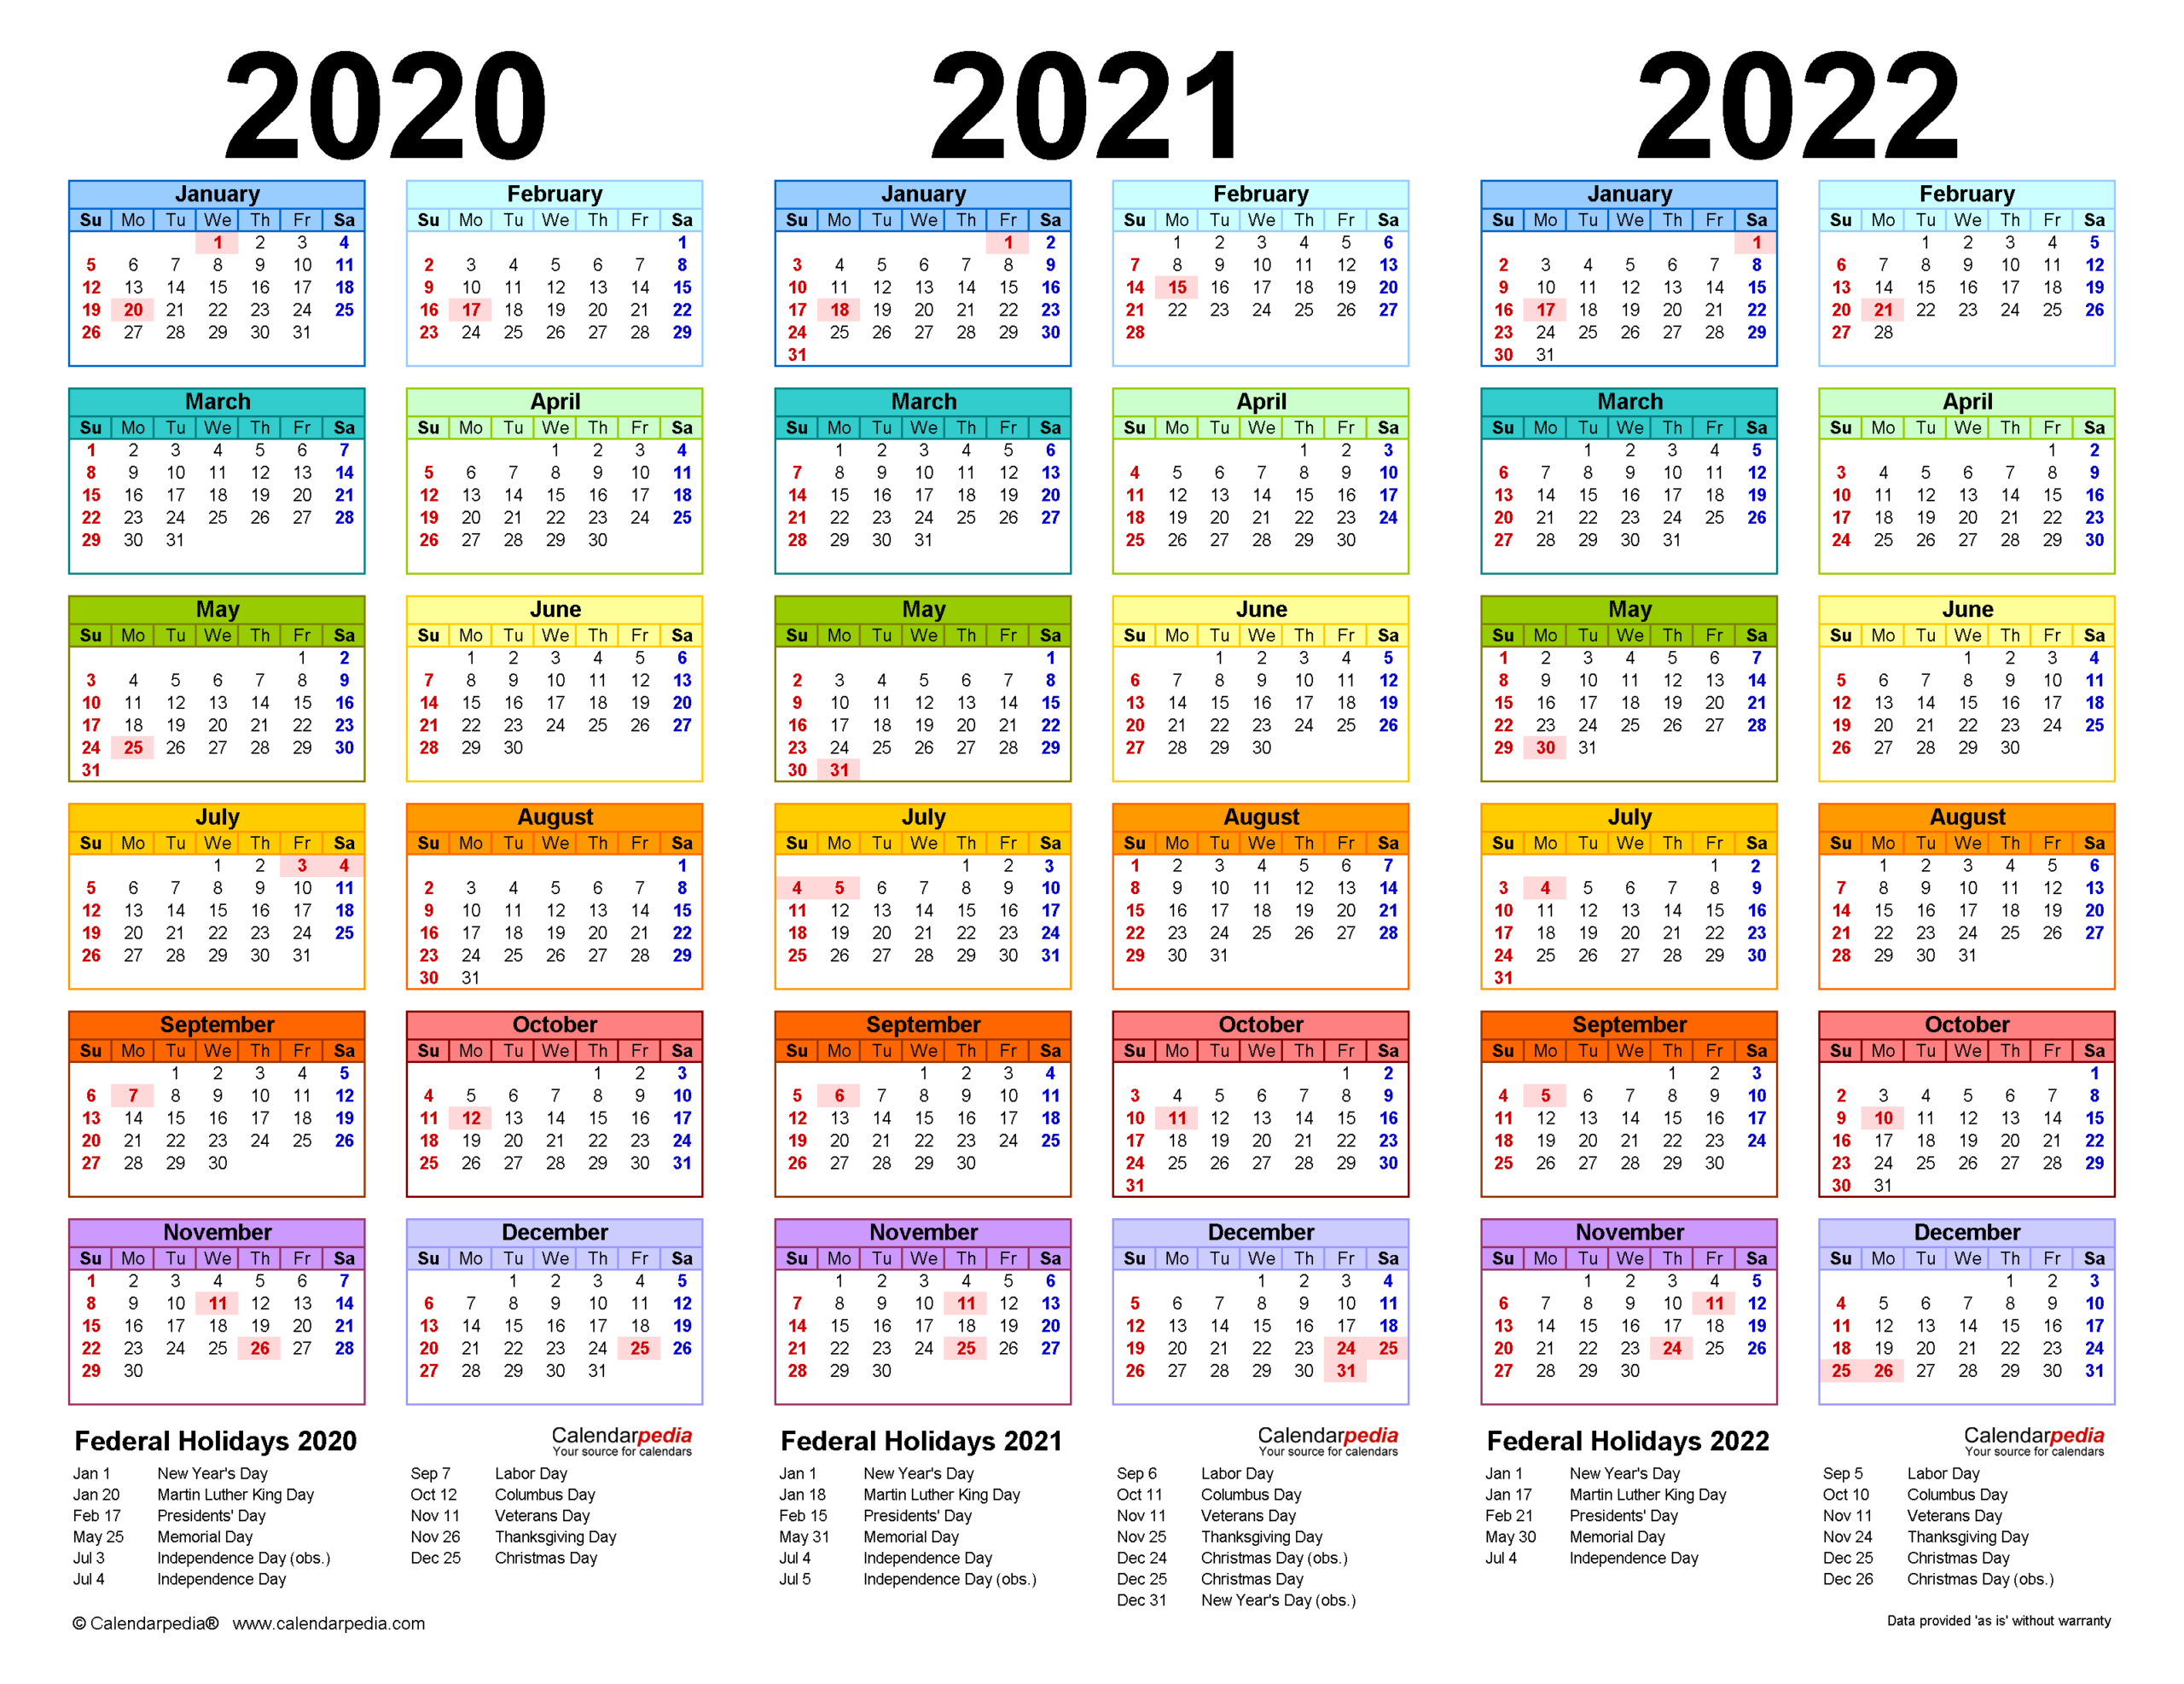 2021 2022 Calendar | Printable Calendars 2021-Printable Calendar 2022 With Holidays